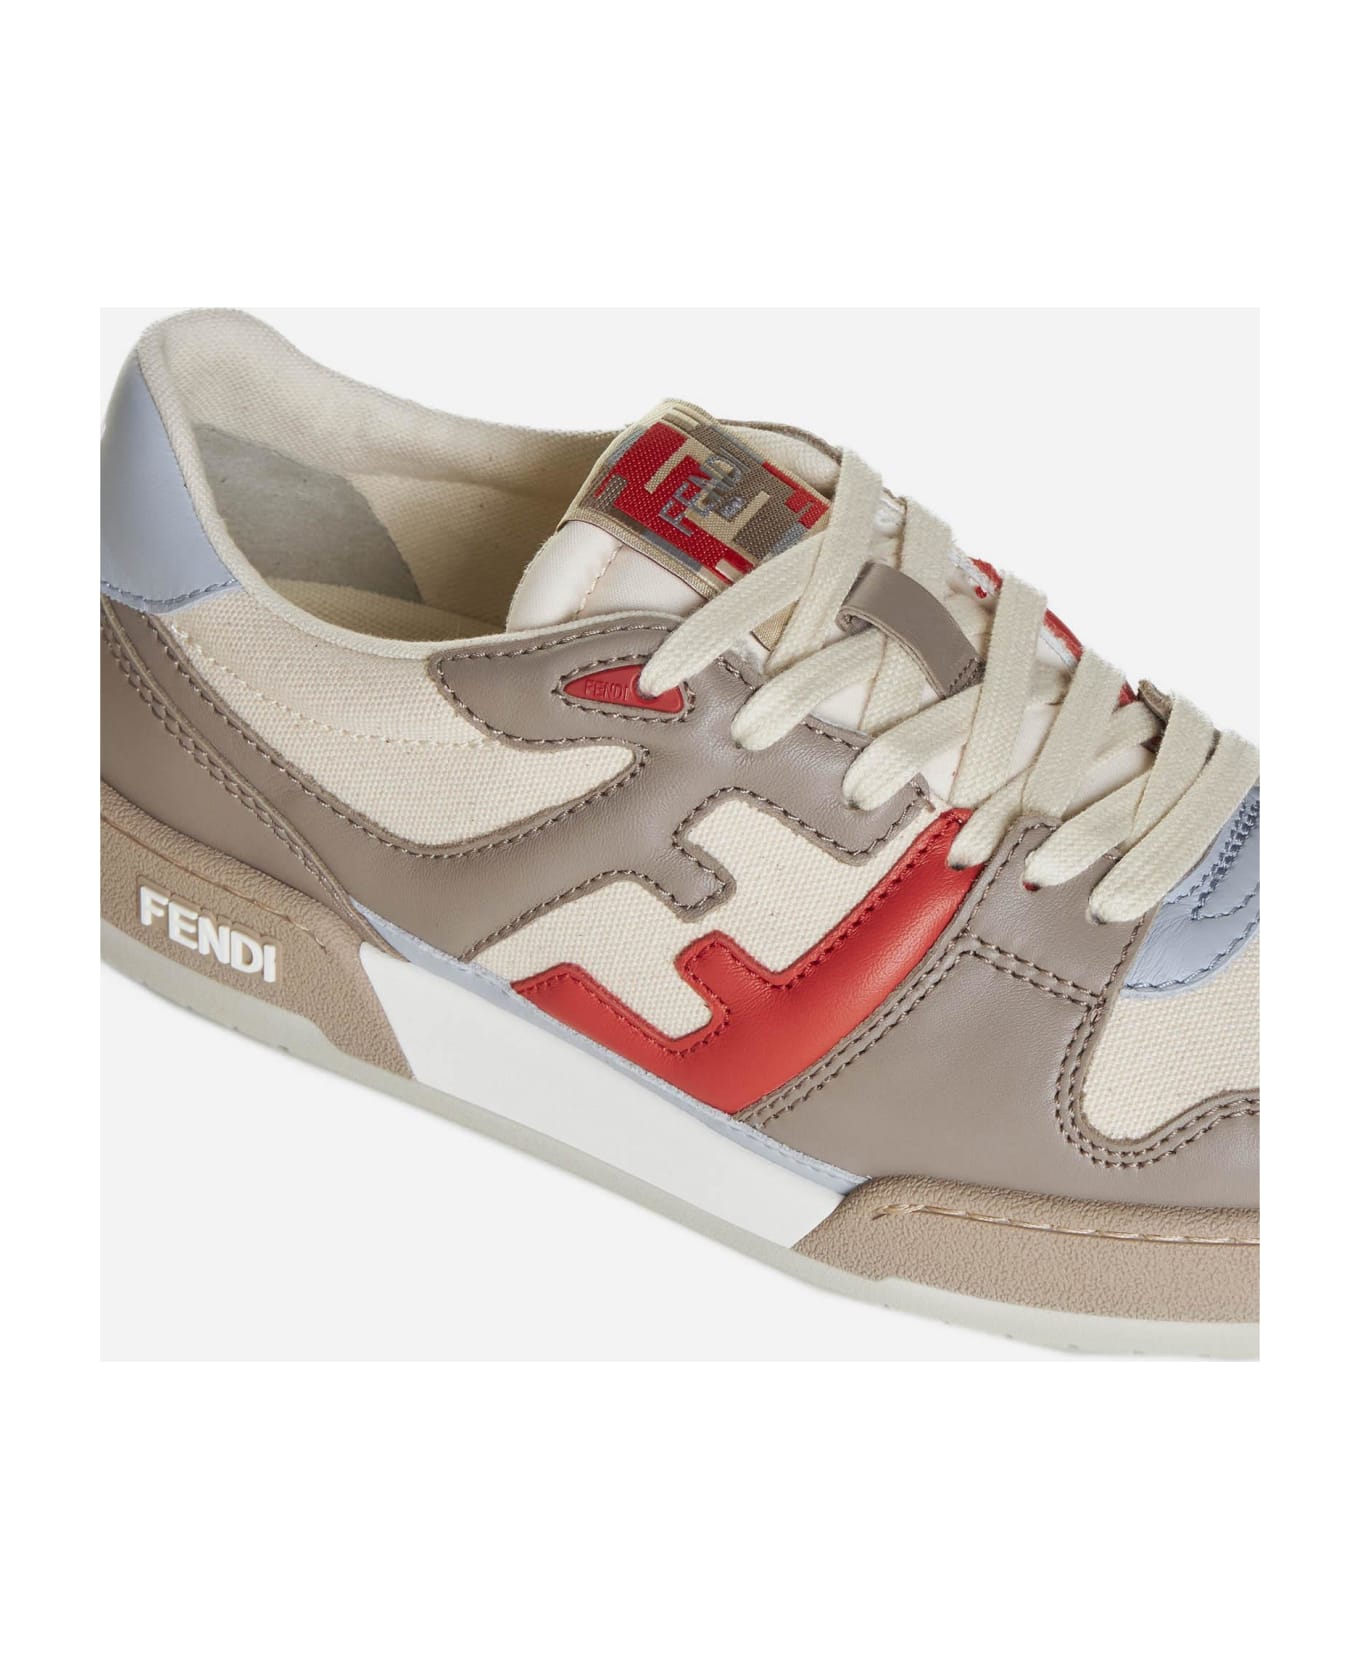 Fendi Match Leather And Fabric Sneakers - Beige